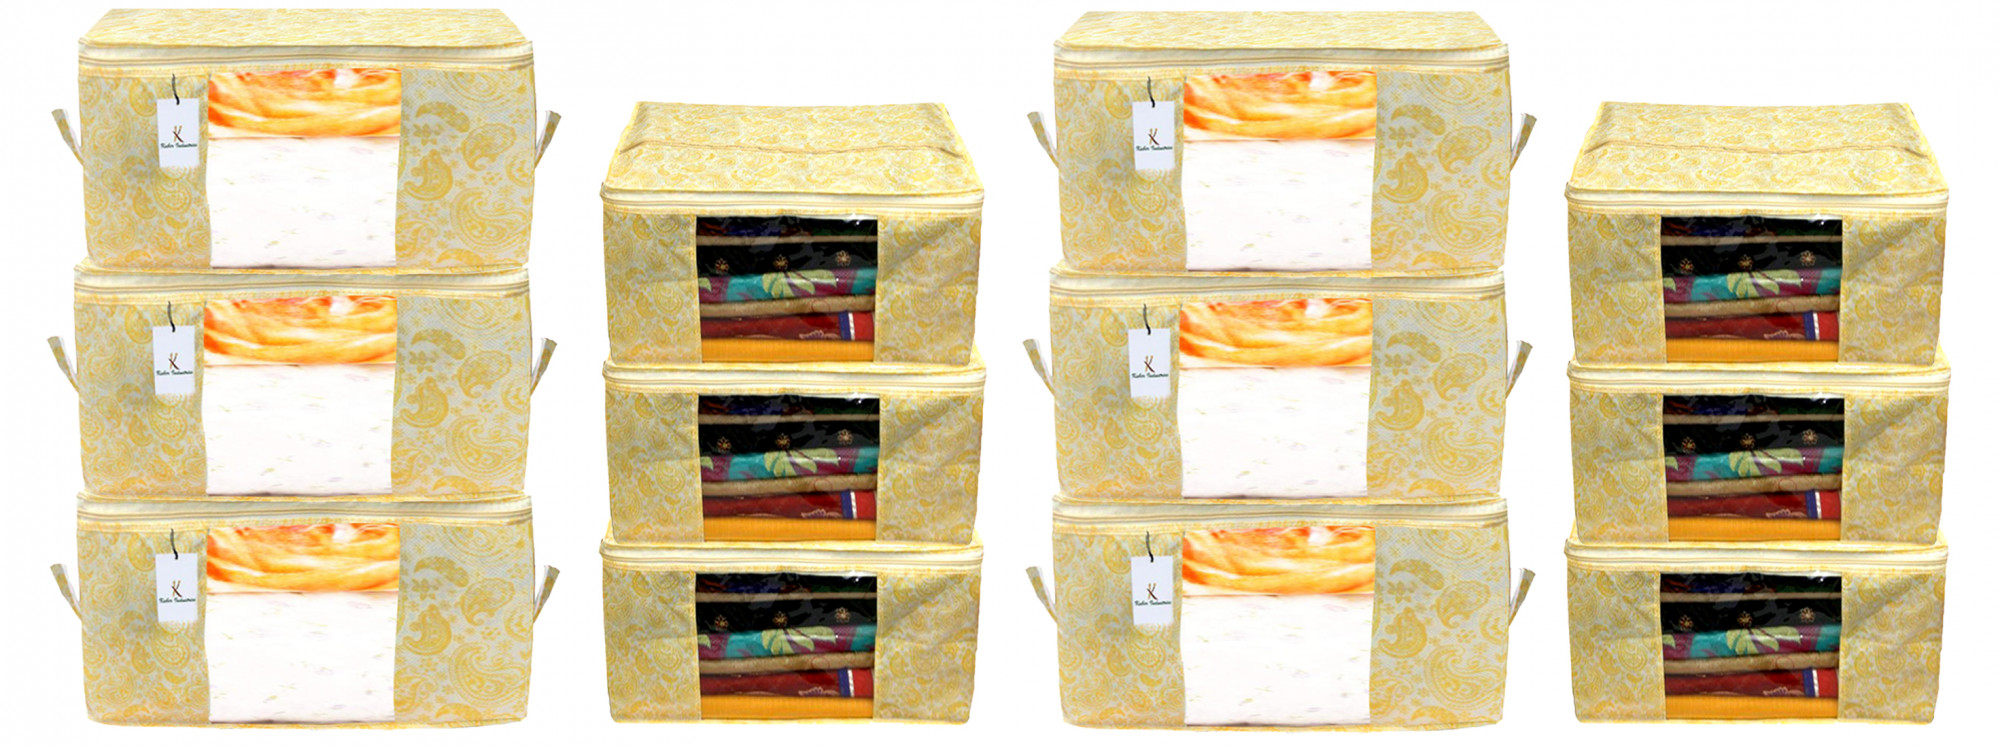 Kuber Industries Metallic Printed Non Woven Saree Cover And Underbed Storage Bag, Cloth Organizer For Storage, Blanket Cover Combo Set (Gold) -CTKTC38583